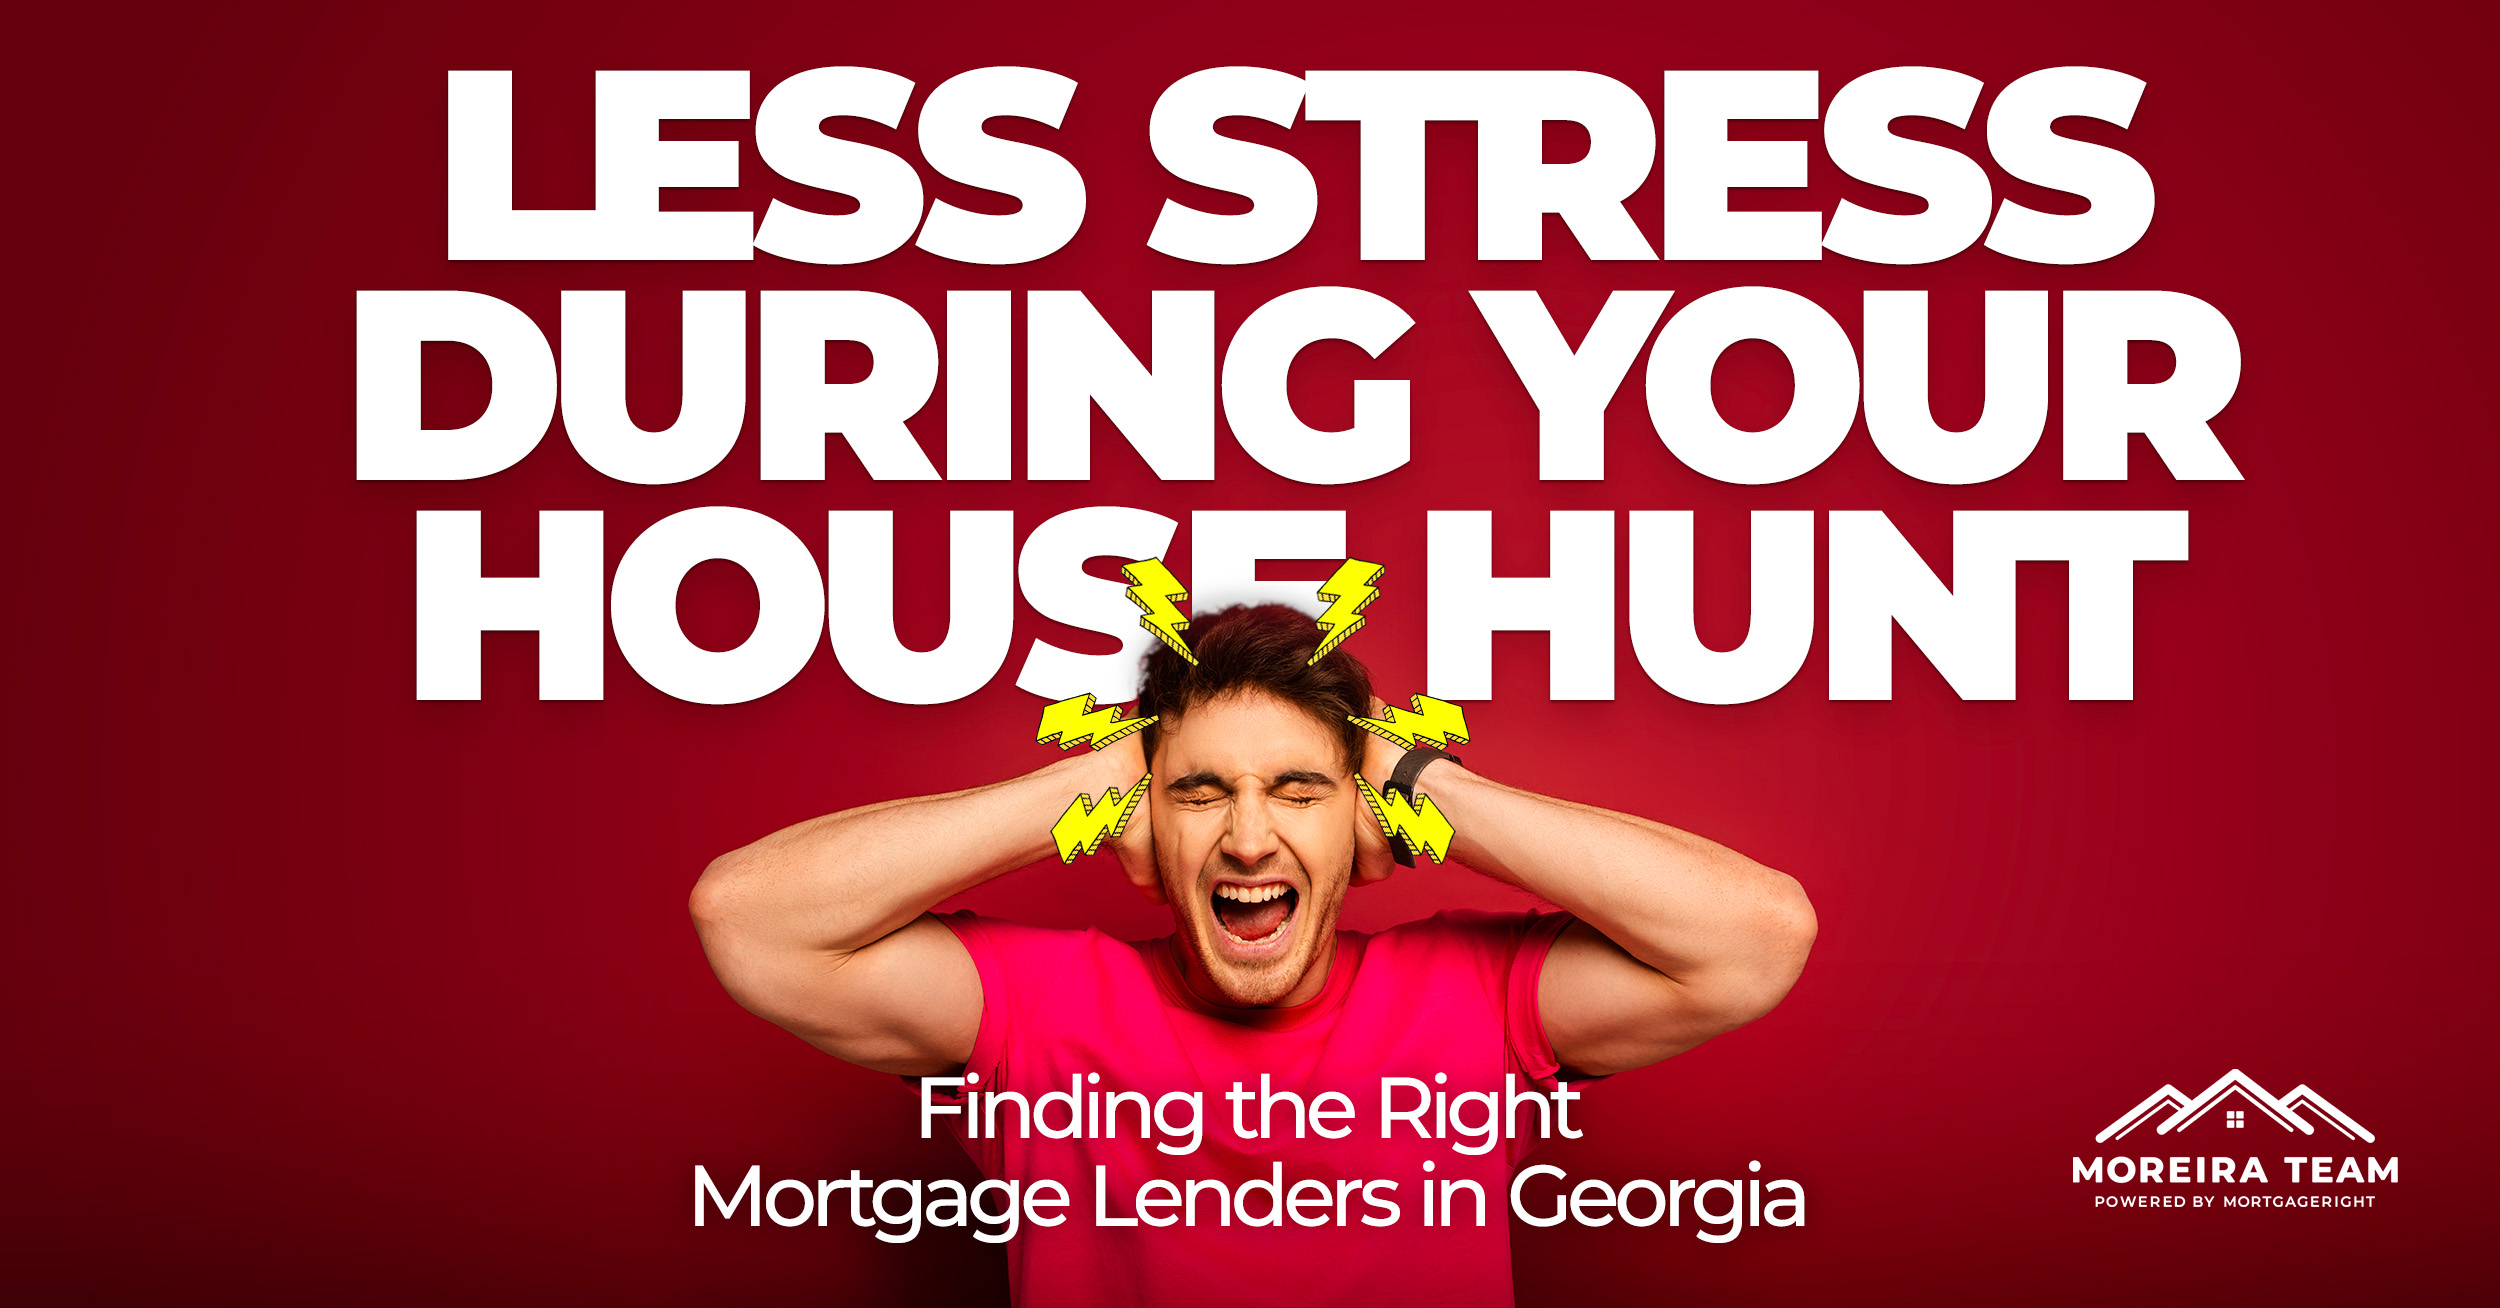 For Less Stress During Your House Hunt— Find the Right Mortgage Lenders in Georgia